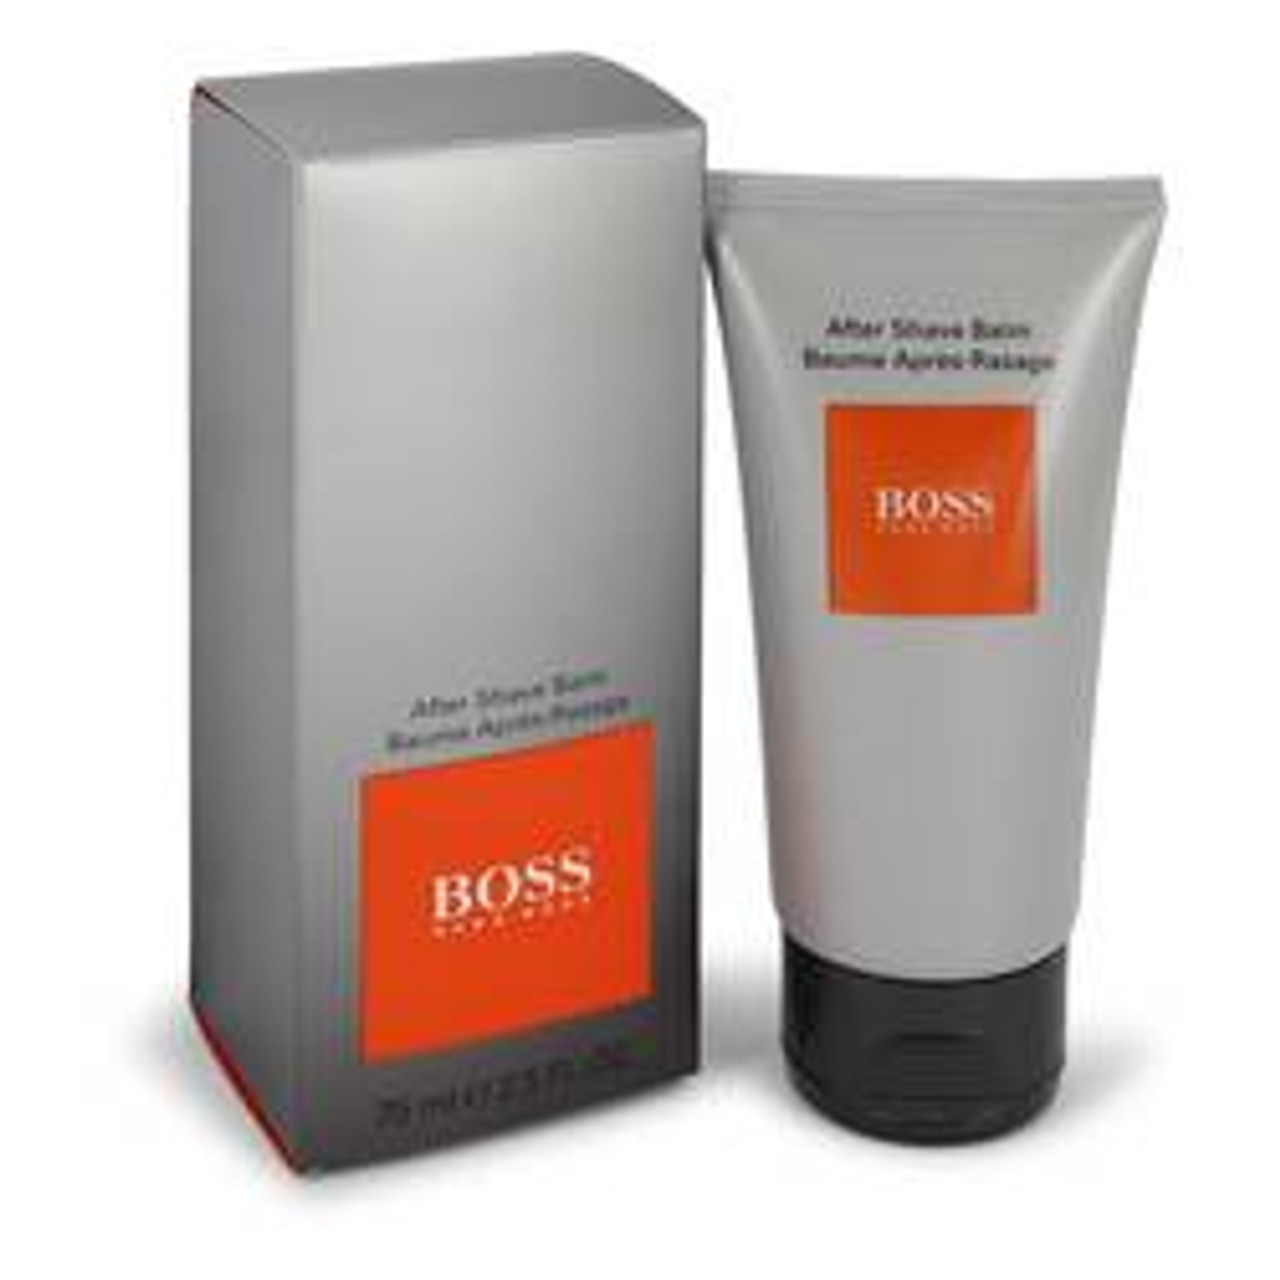 Boss In Motion Cologne By Hugo Boss After Shave Balm 2.5 oz for Men - [From 43.00 - Choose pk Qty ] - *Ships from Miami